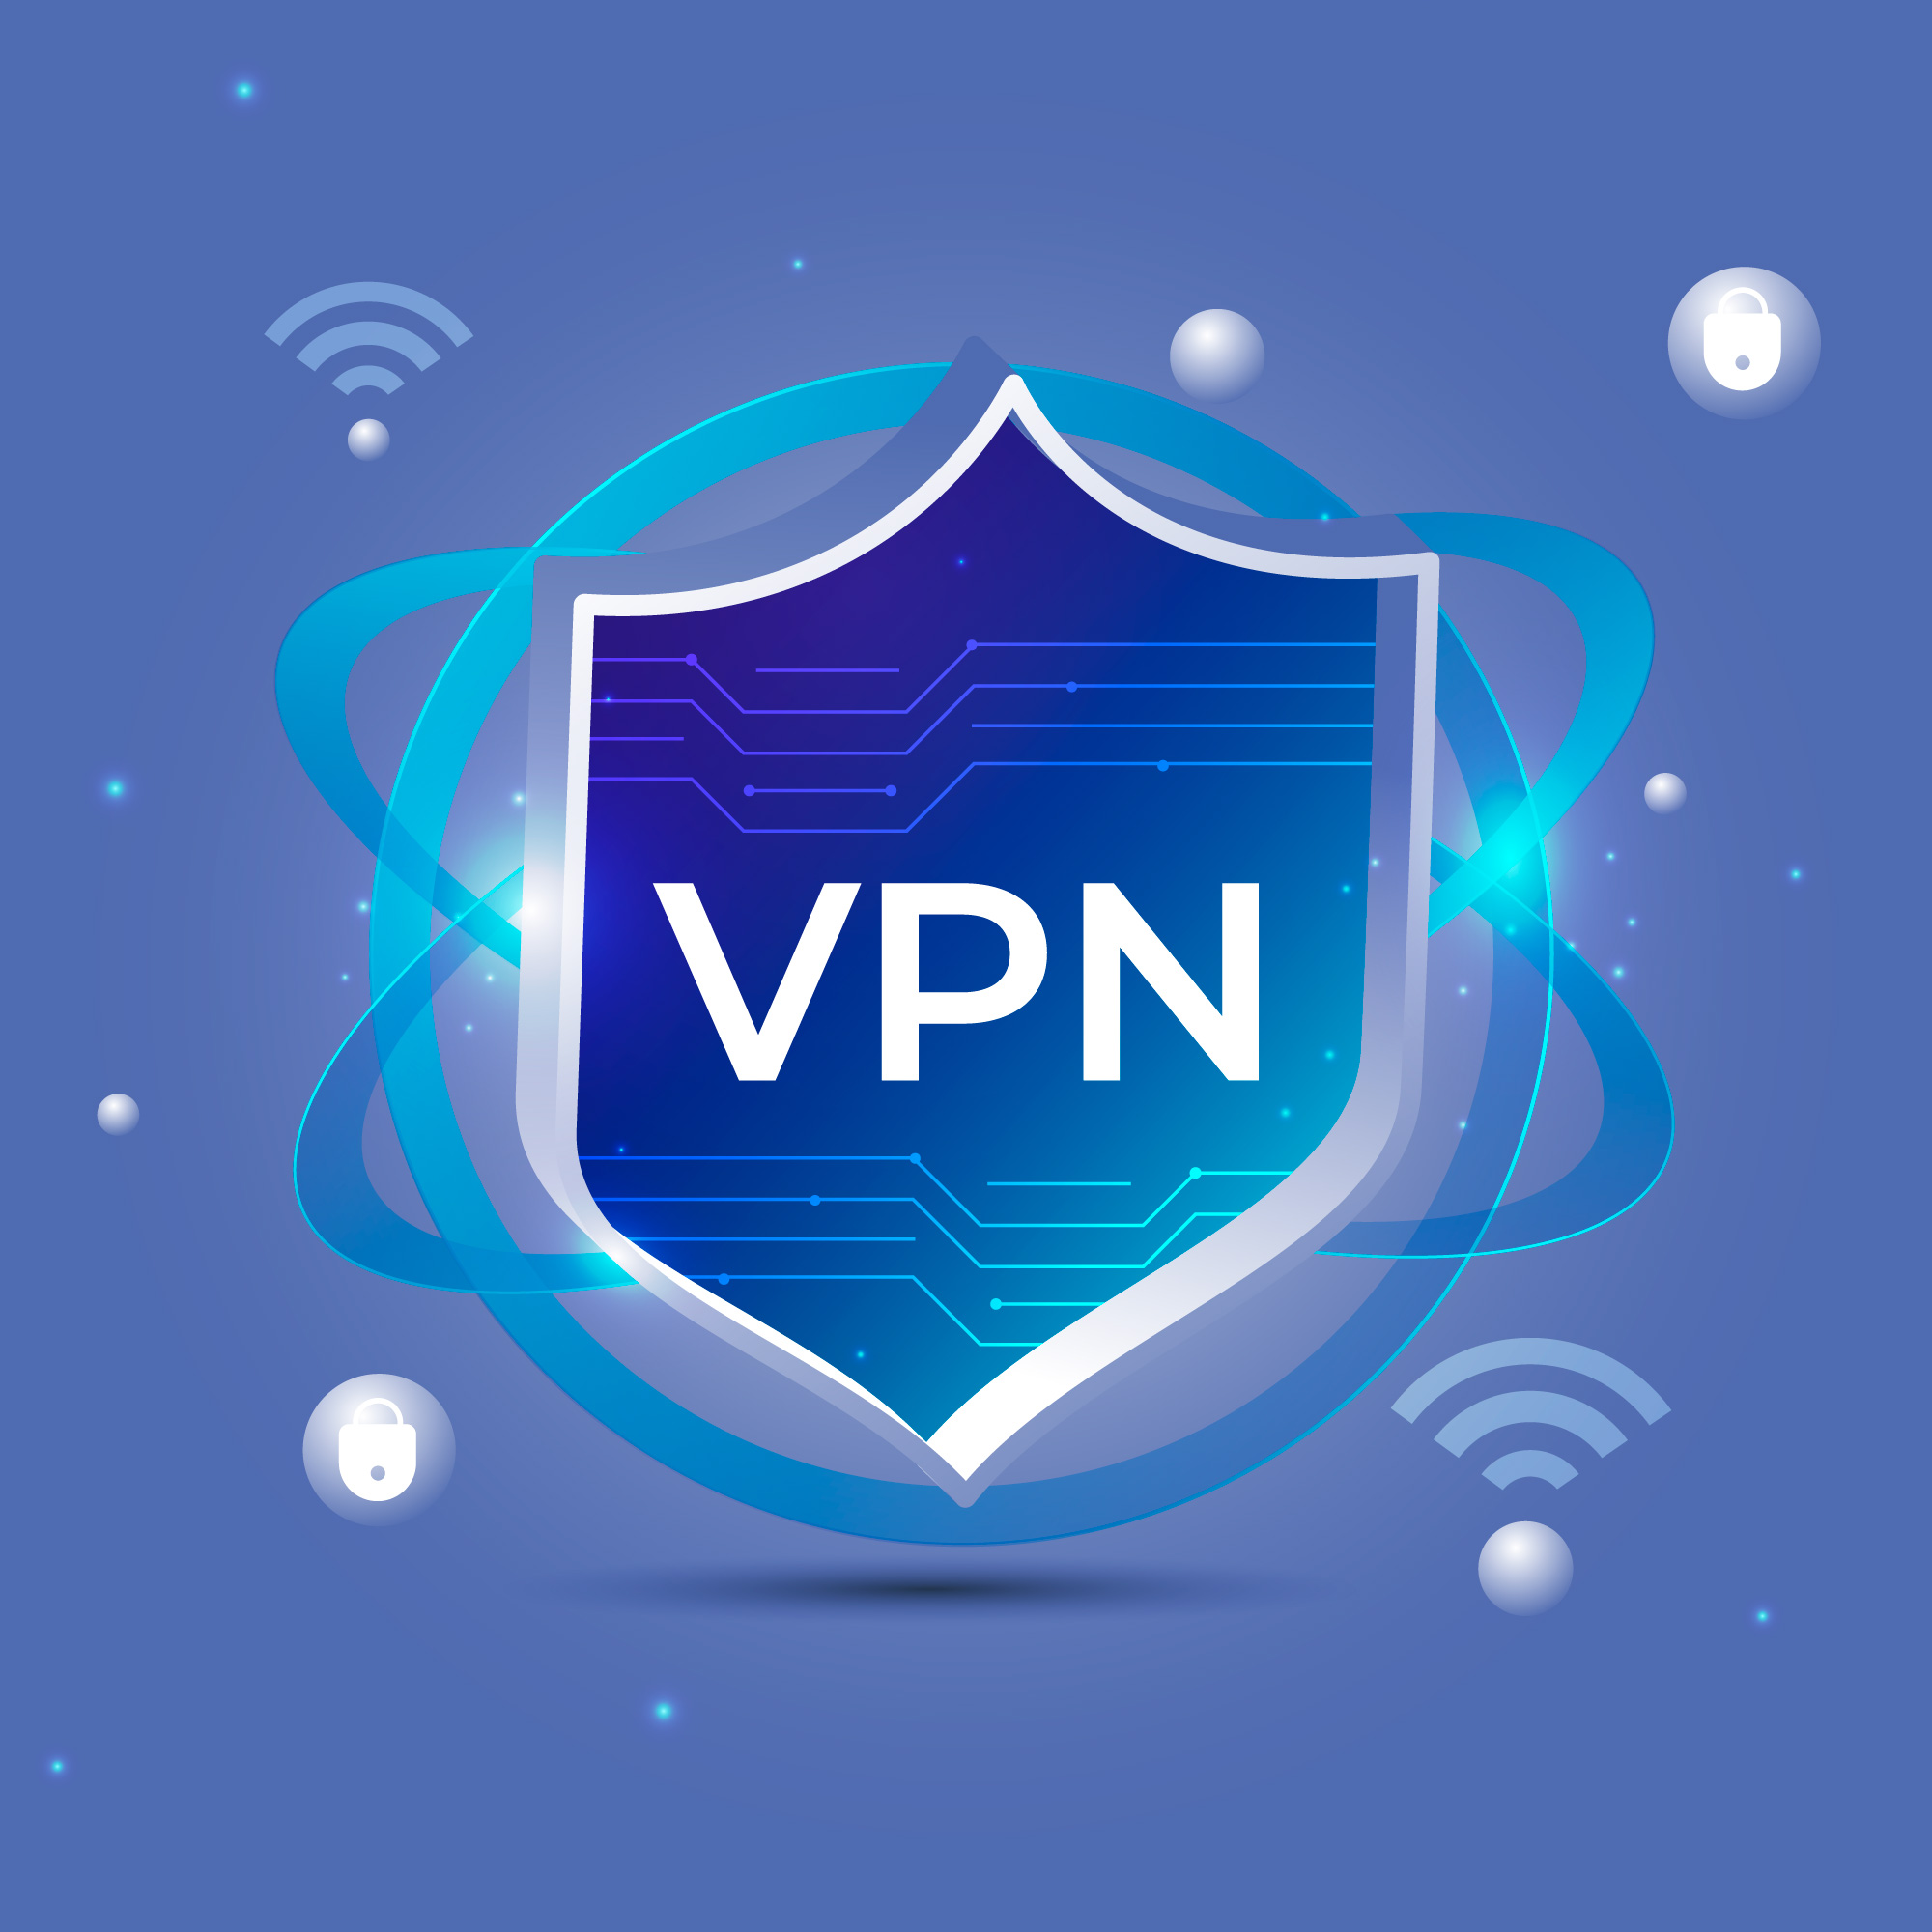 NordVPN Vs Hotspot Shield: Which One is More Valuable?